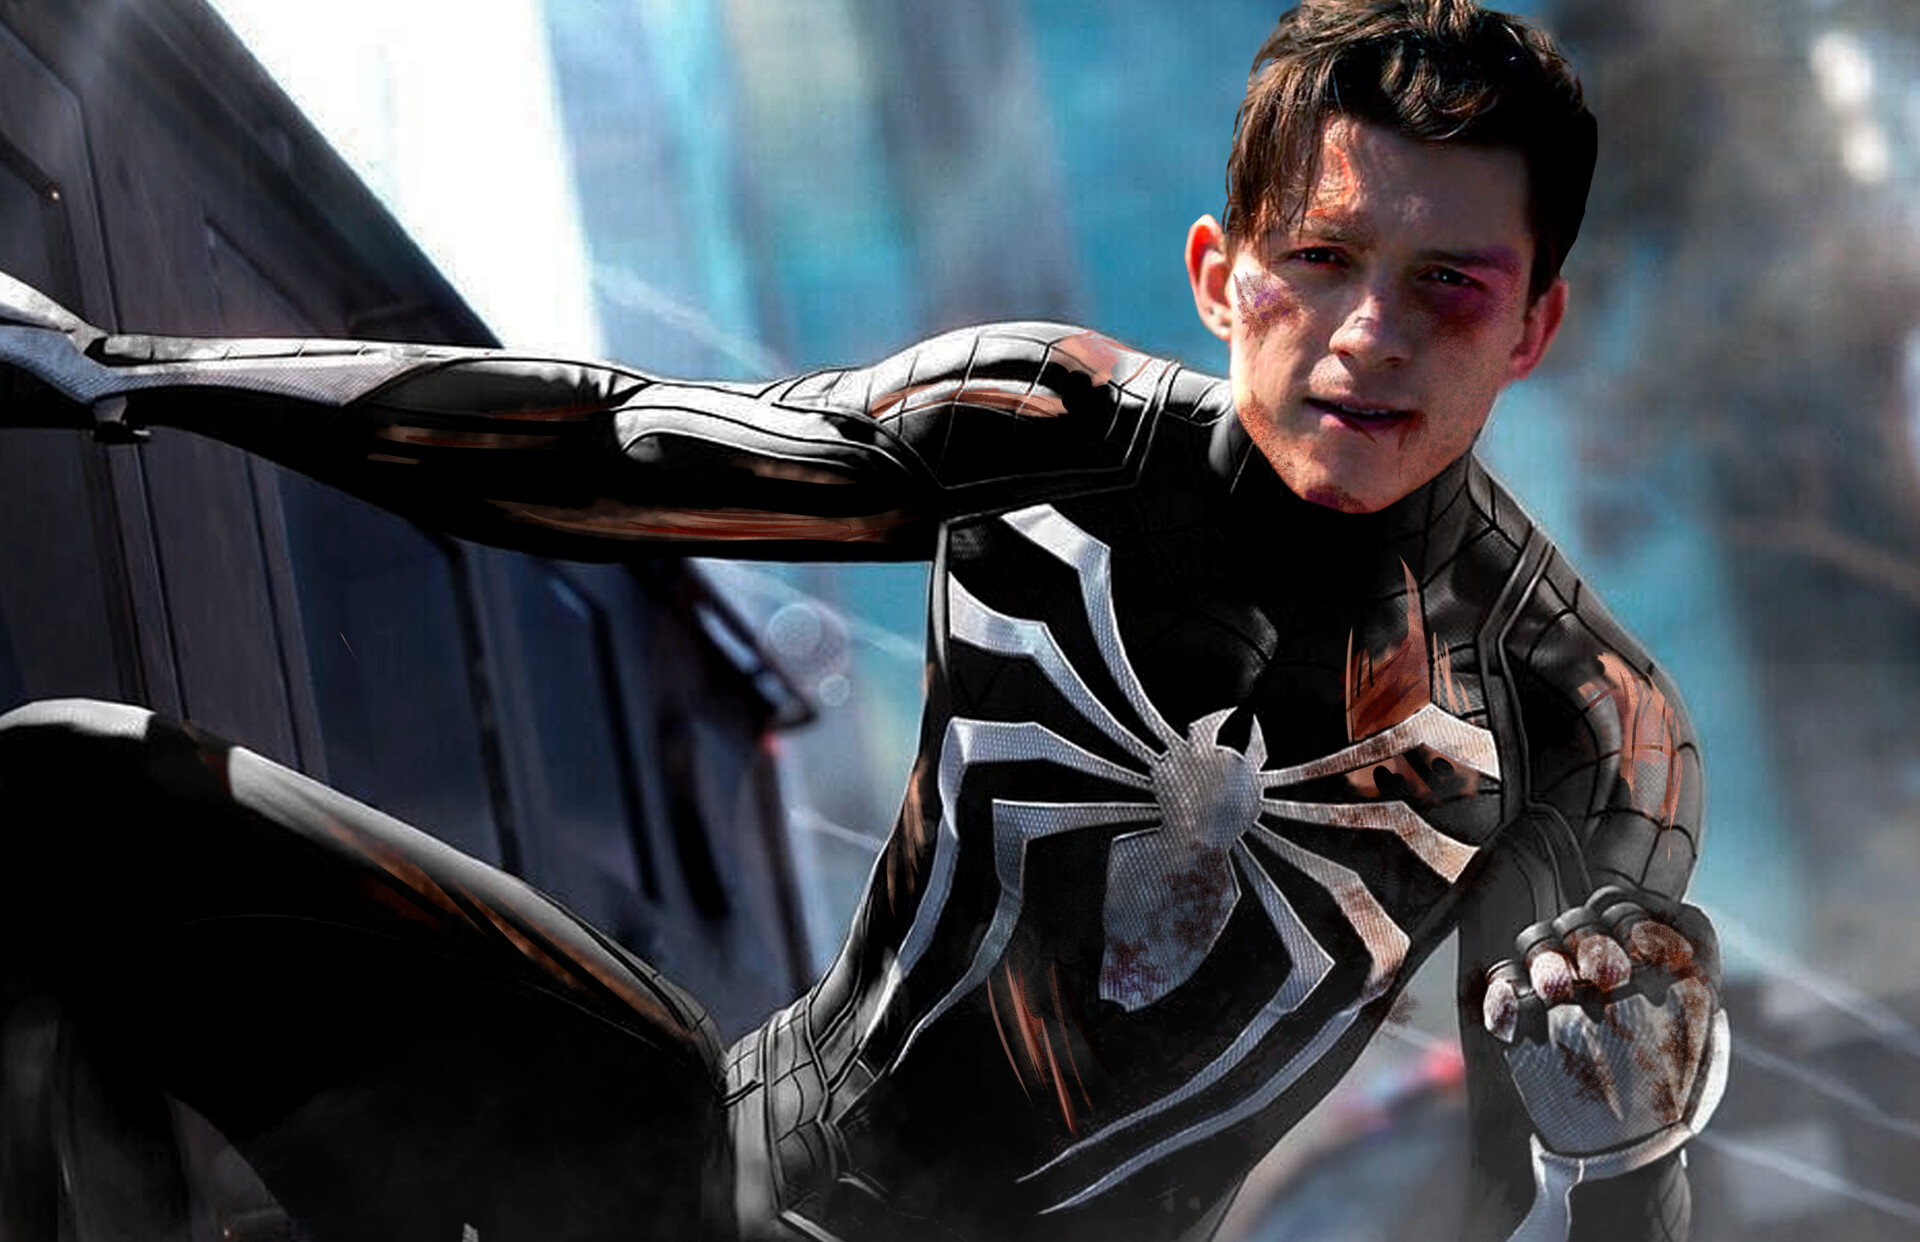 ArtStation - Concept Tom Holland - Spiderman with symbiote costume